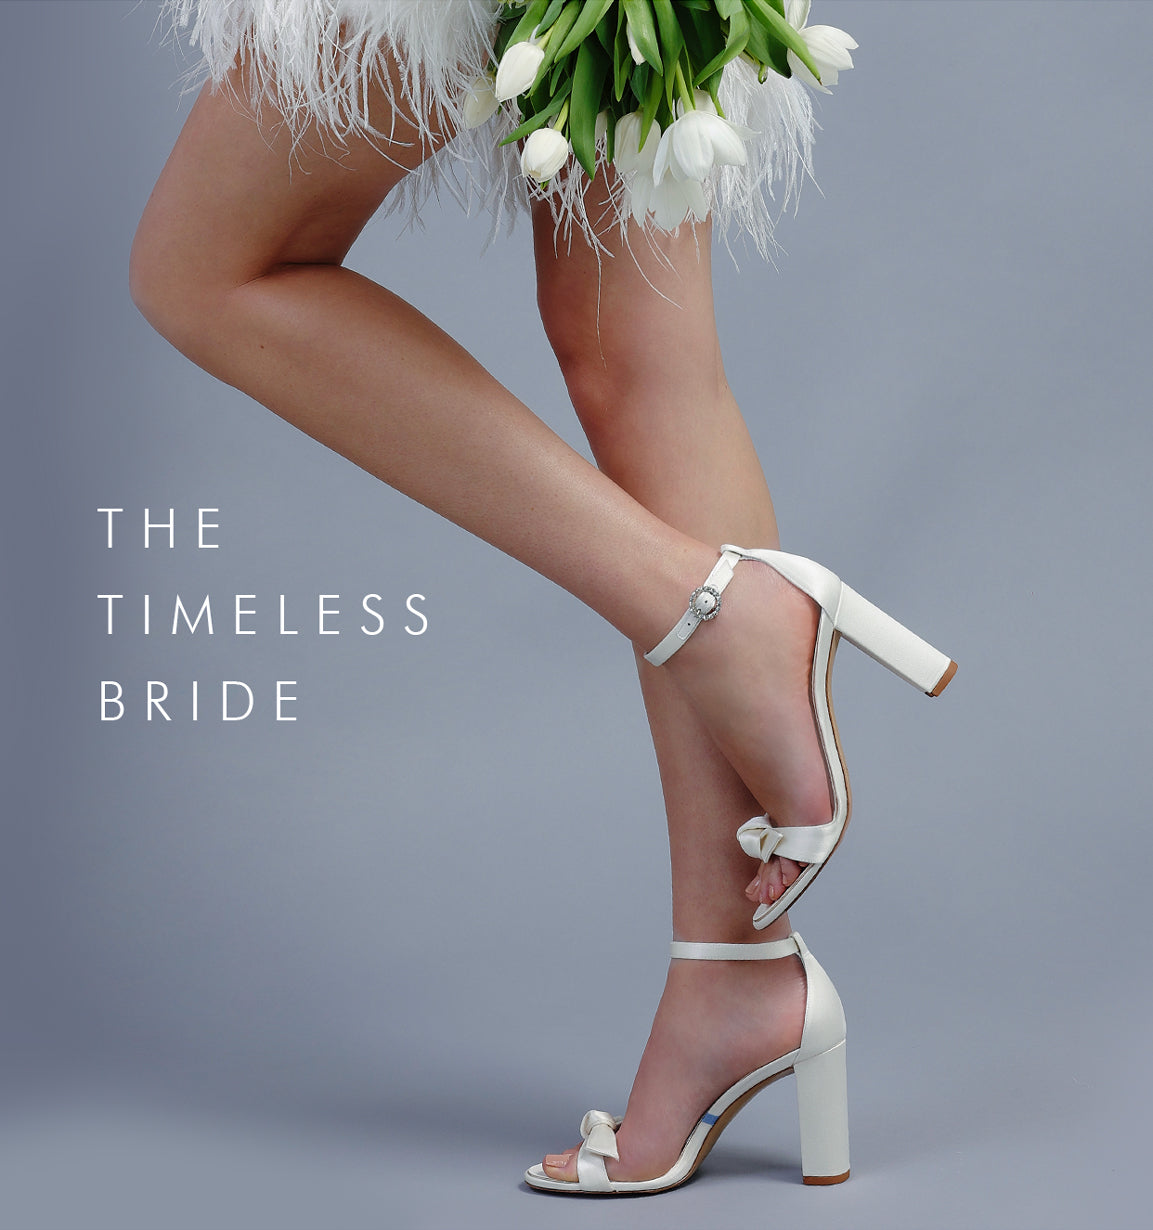 Gucci Bridal Shoes for the Bride's Something Blue